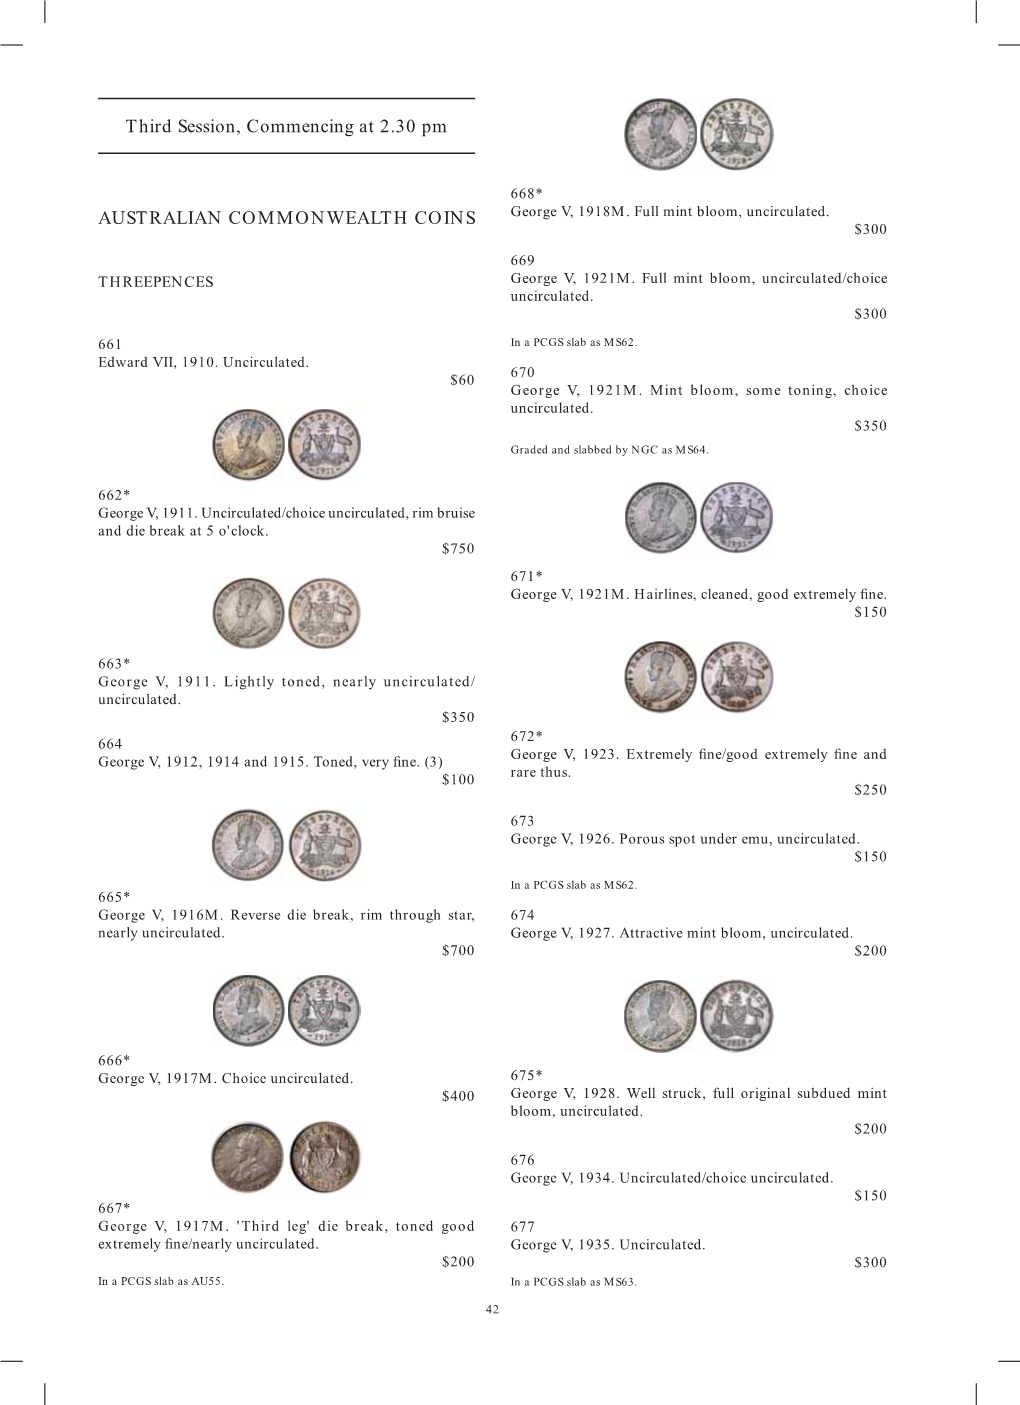 Third Session, Commencing at 2.30 Pm AUSTRALIAN COMMONWEALTH COINS